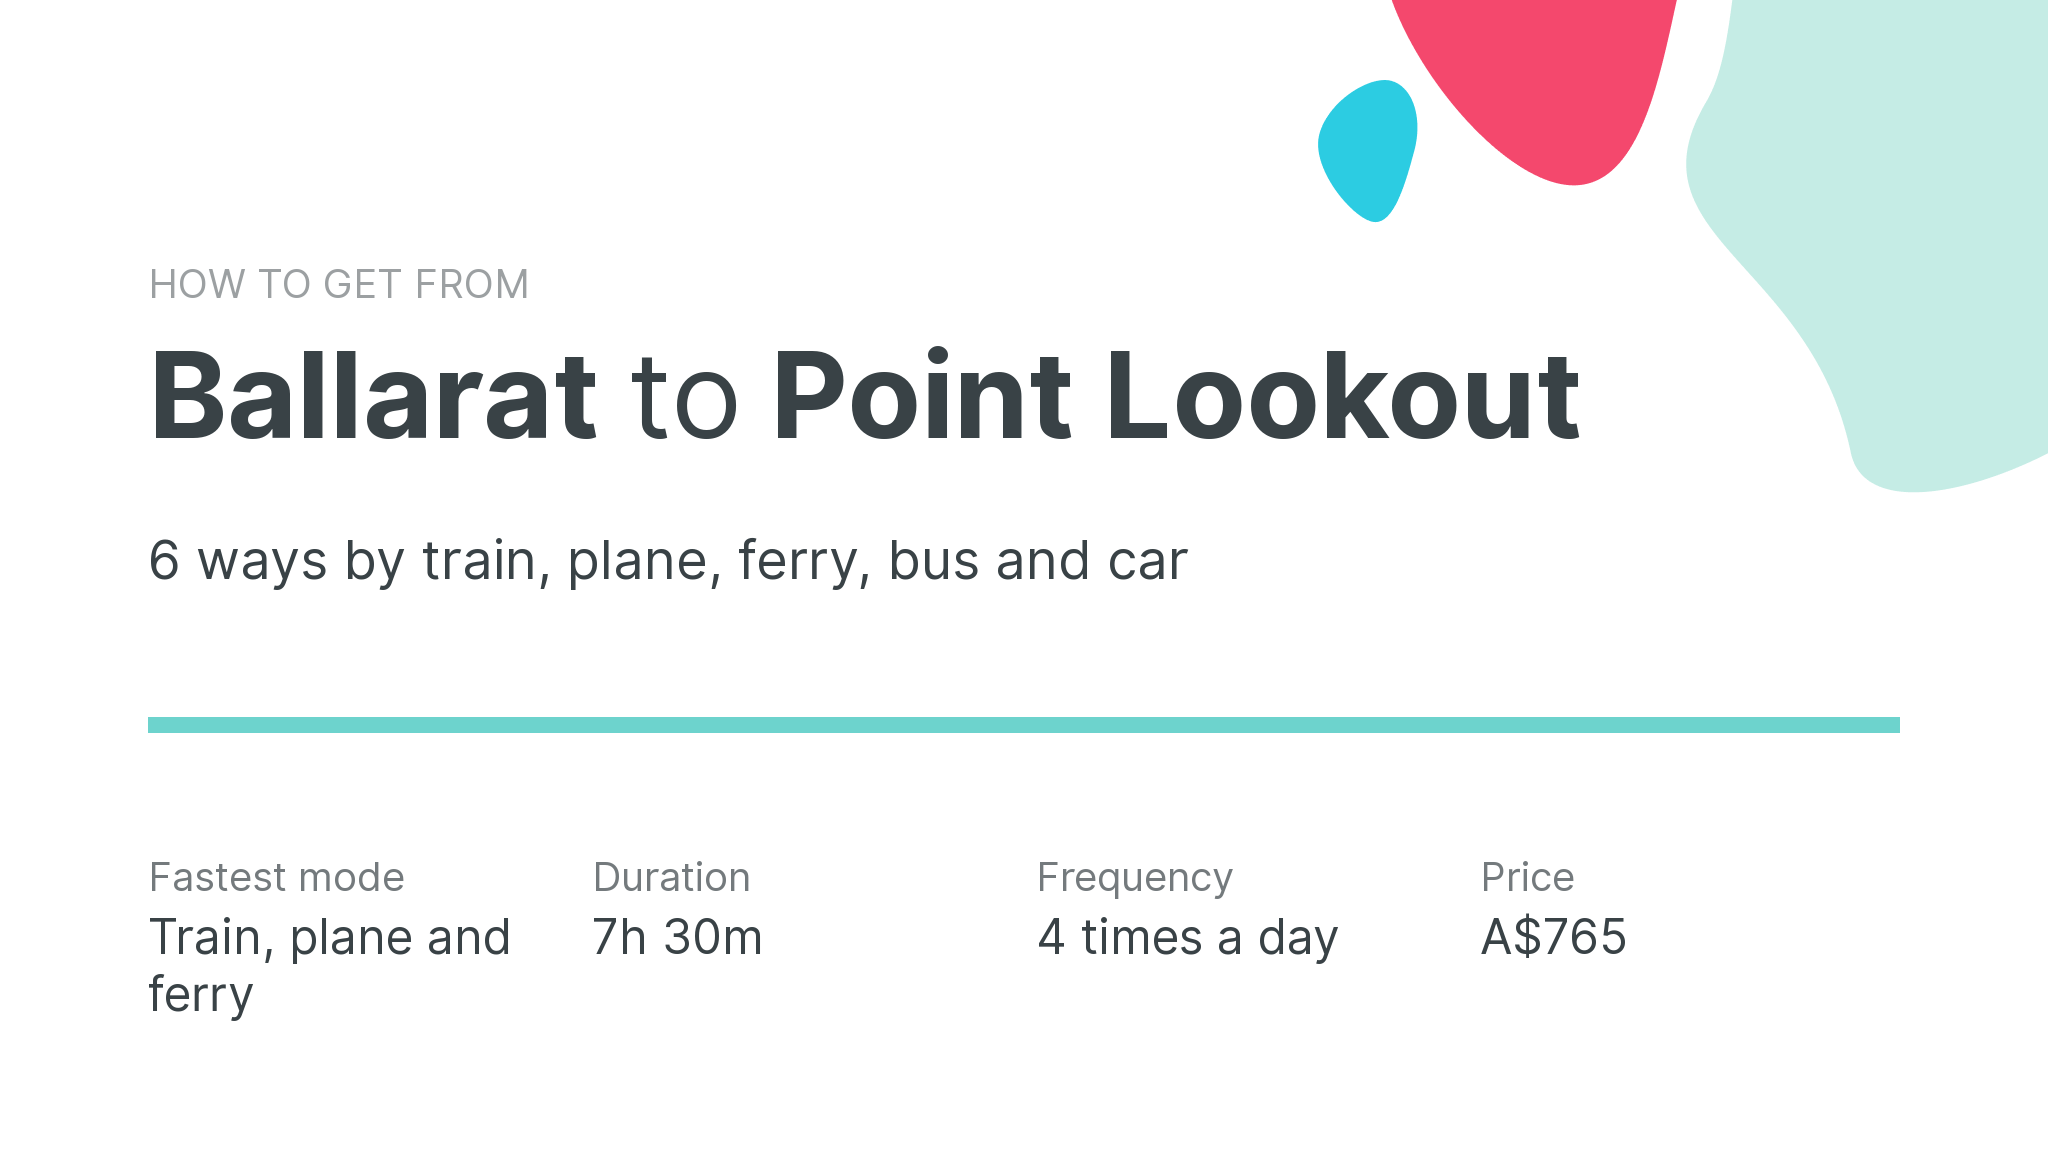 How do I get from Ballarat to Point Lookout